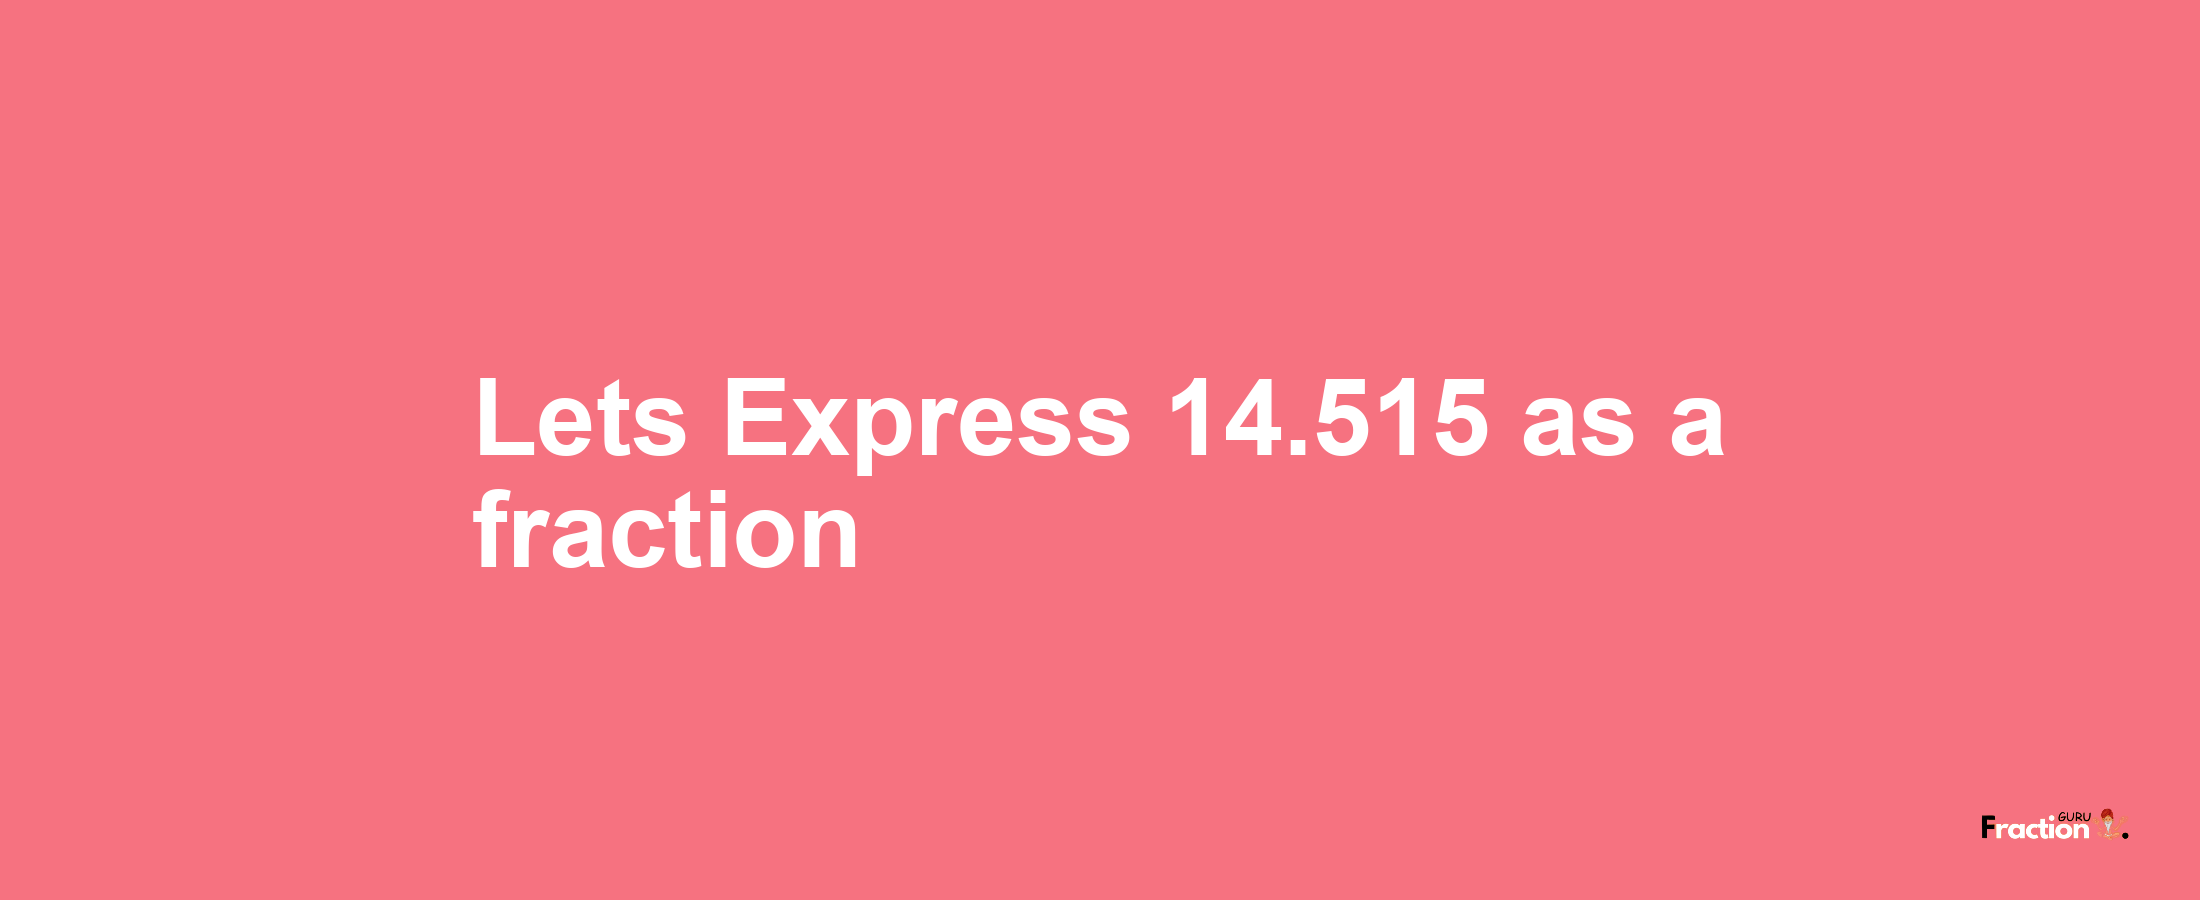 Lets Express 14.515 as afraction